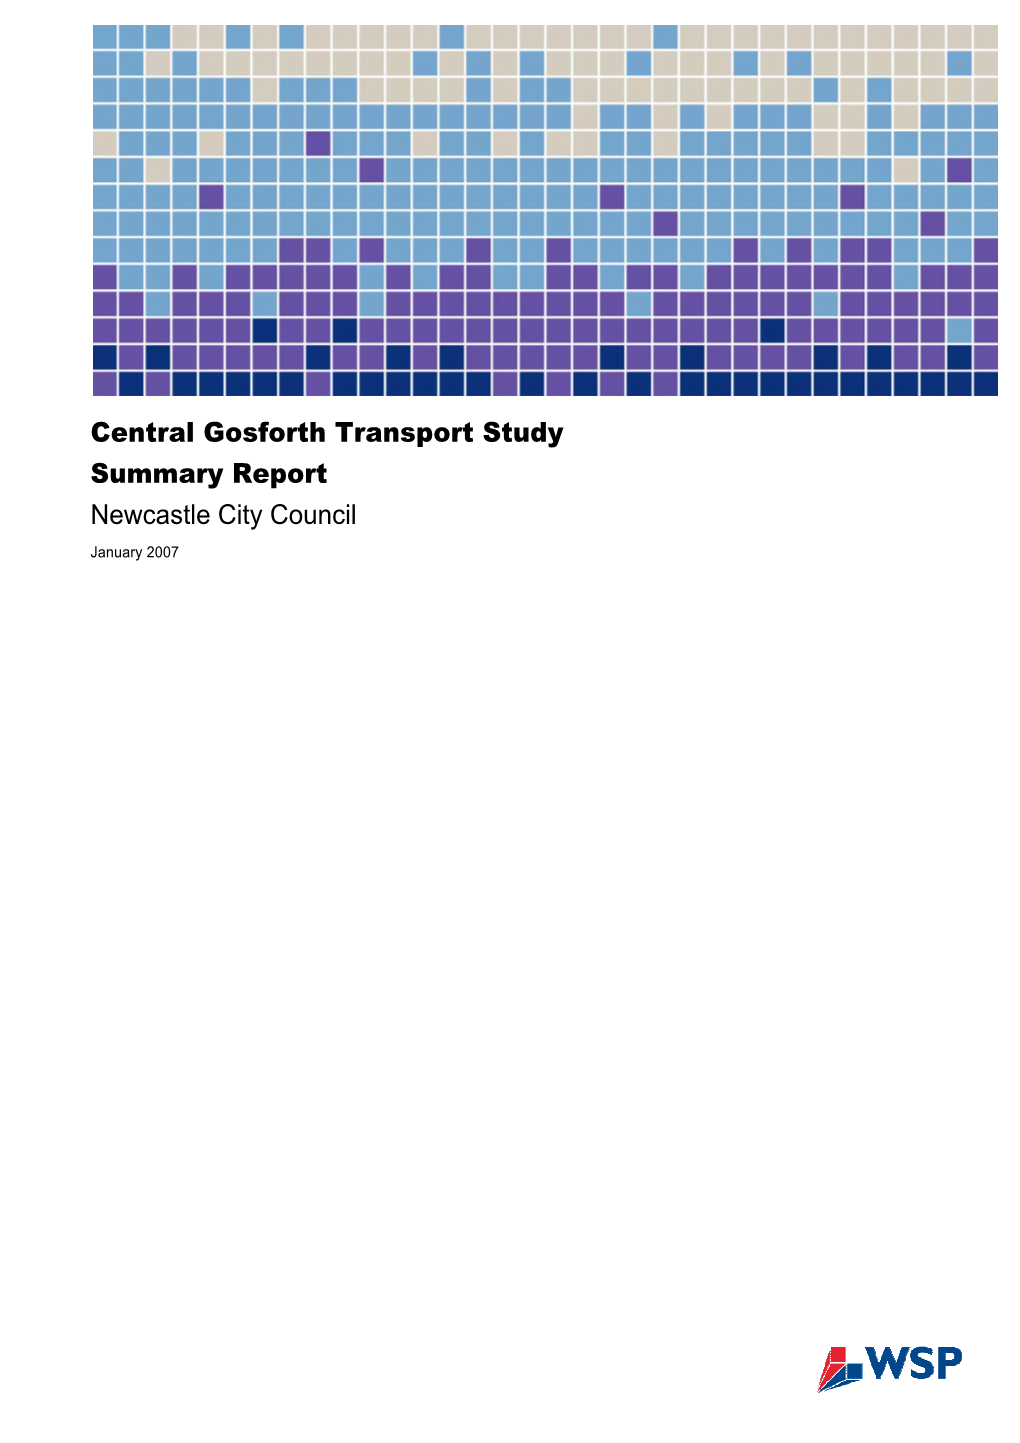 Central Gosforth Transport Study Summary Report Newcastle City Council